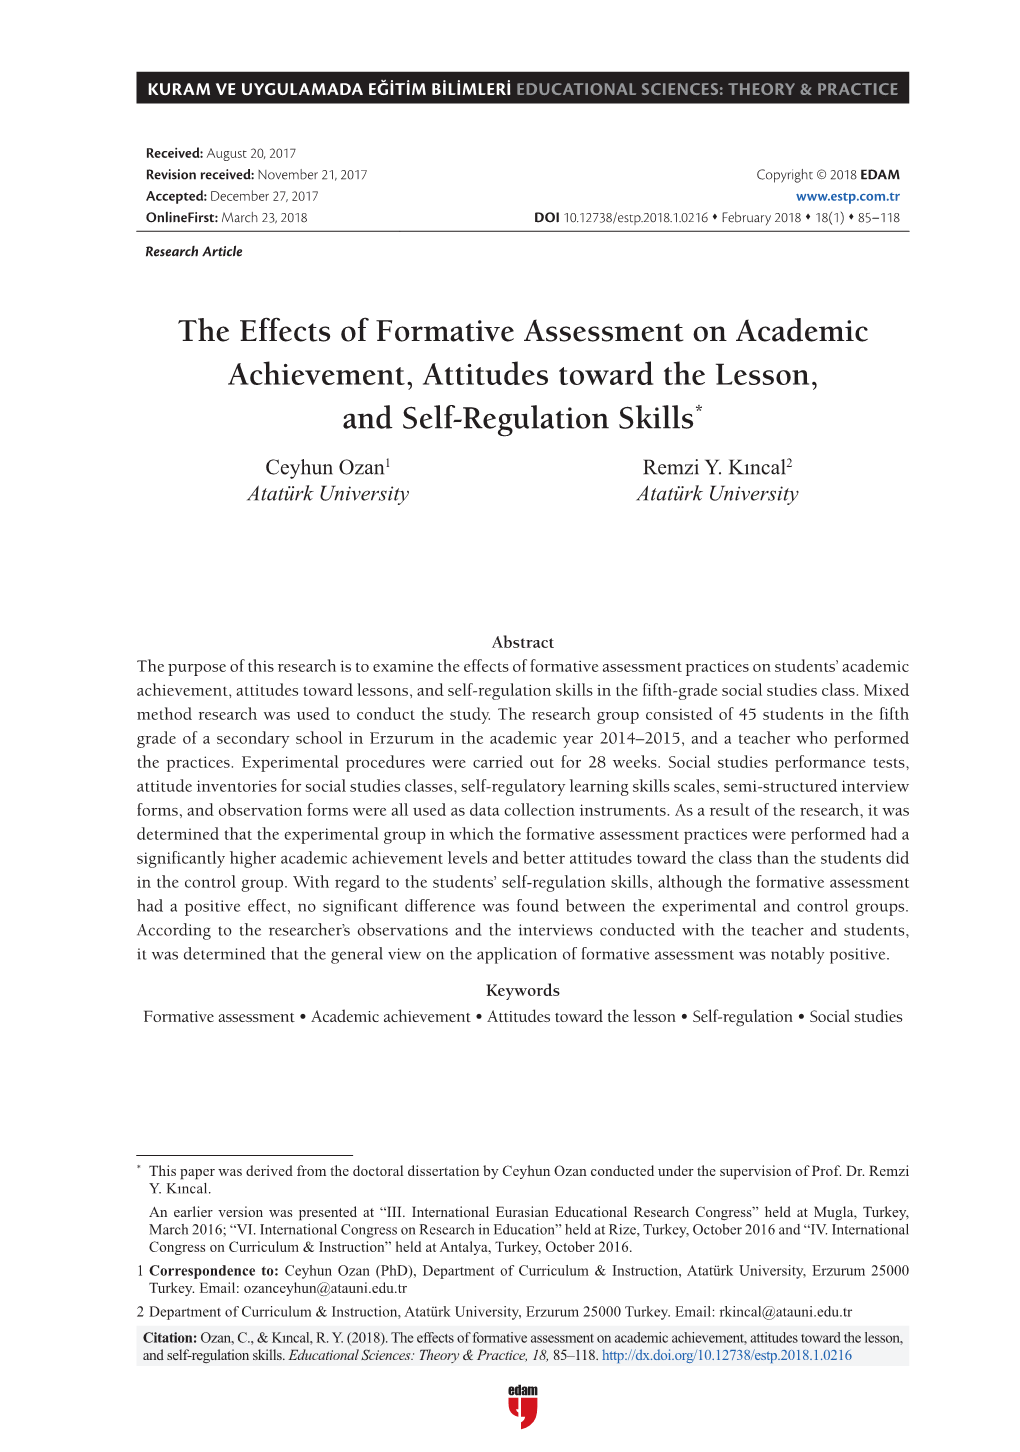 The Effects of Formative Assessment on Academic Achievement, Attitudes Toward the Lesson, and Self-Regulation Skills*